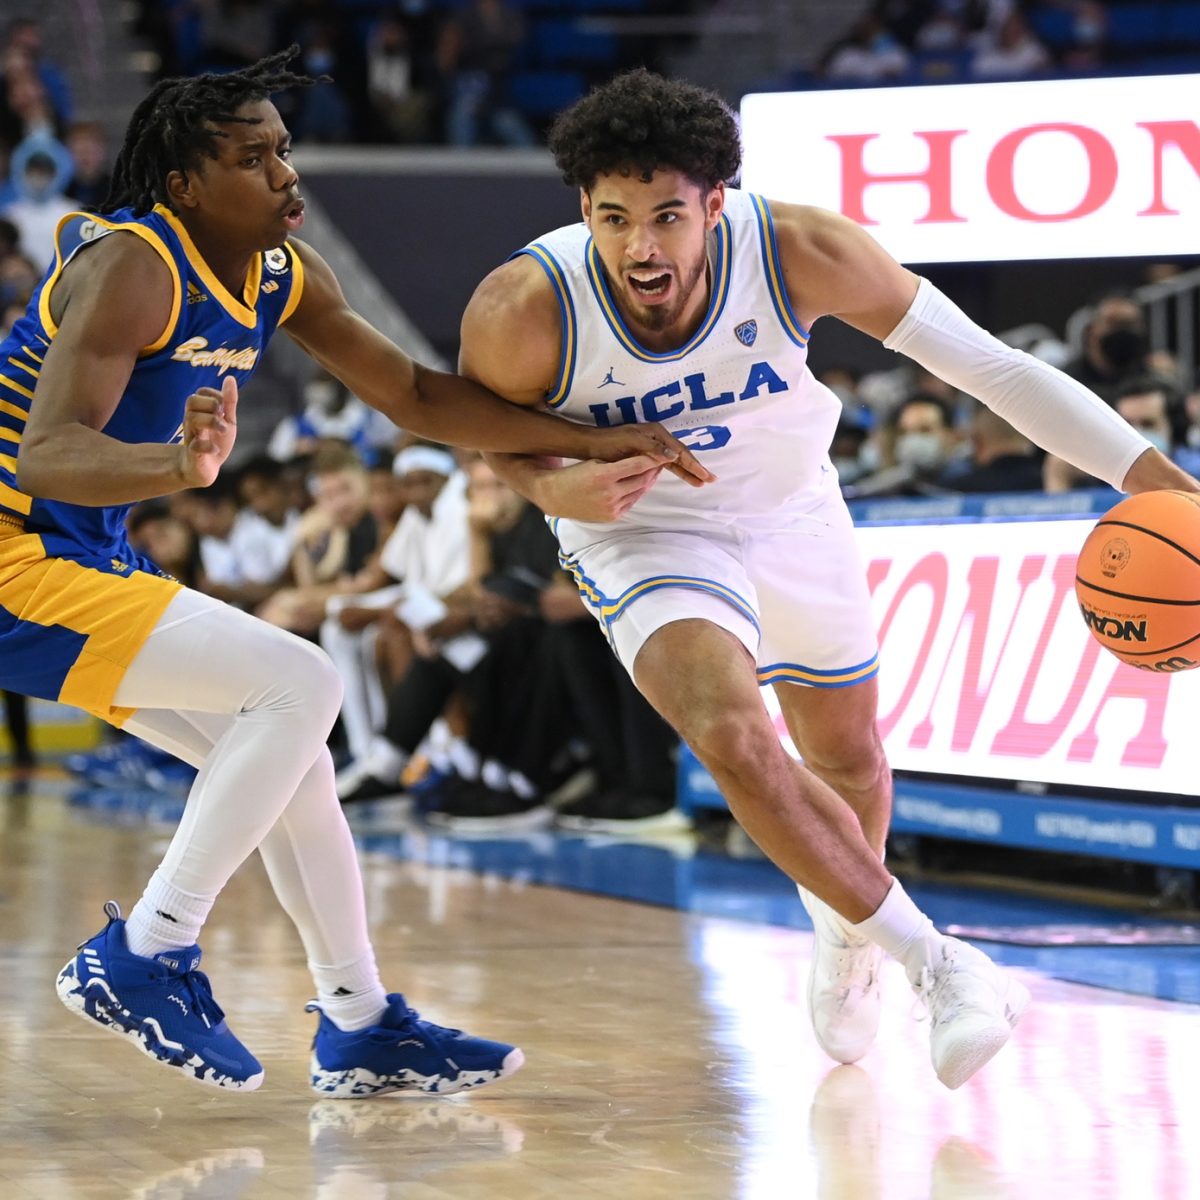 Fresno State vs. Cal State Bakersfield Prediction, Preview, and Odds - 12-20-2022